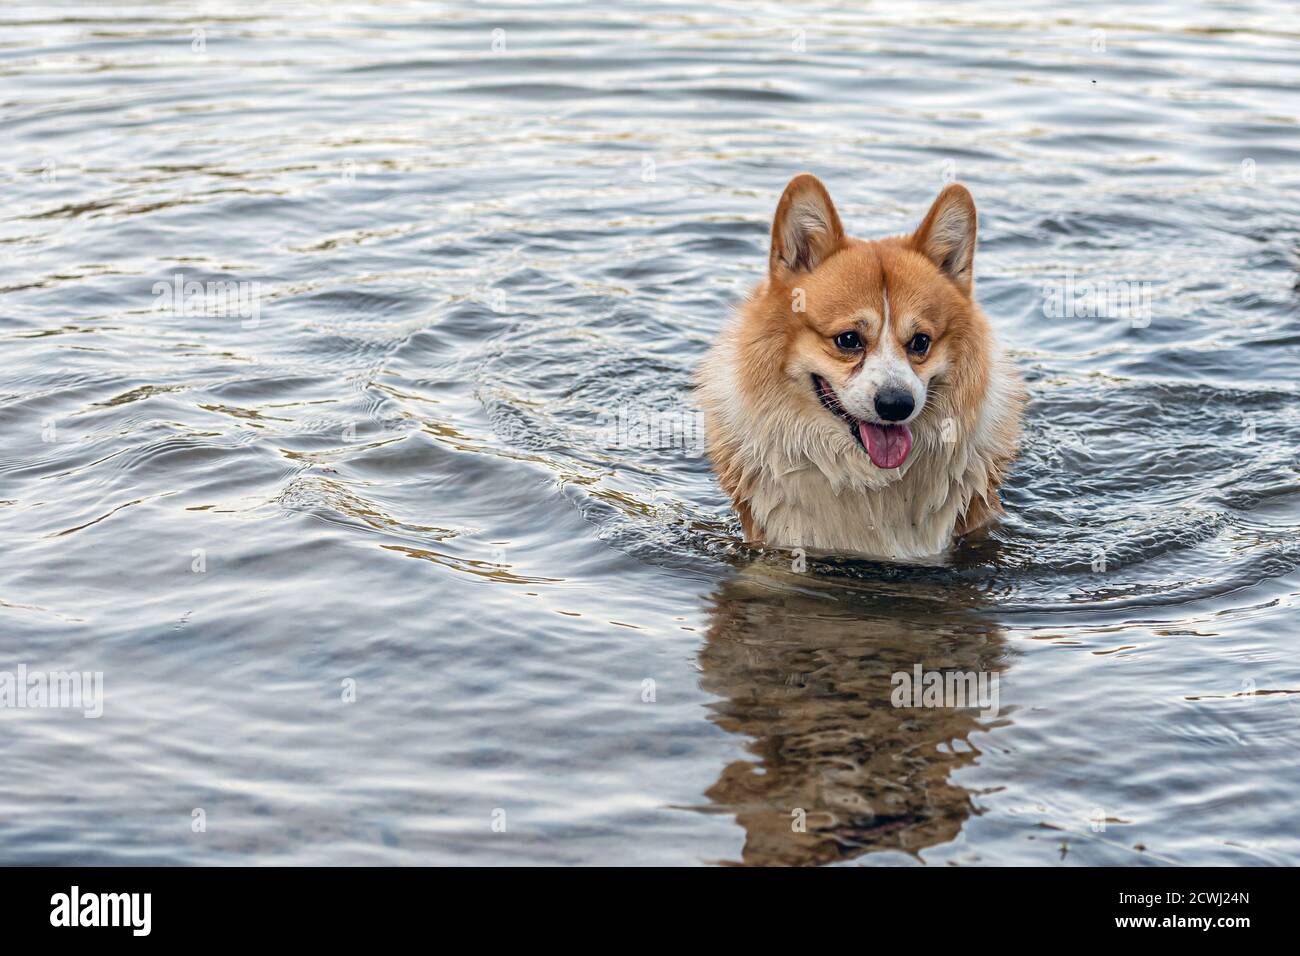 Welsh Corgi Pembroke dog swims in the lake and enjoys a sunny day Stock Photo